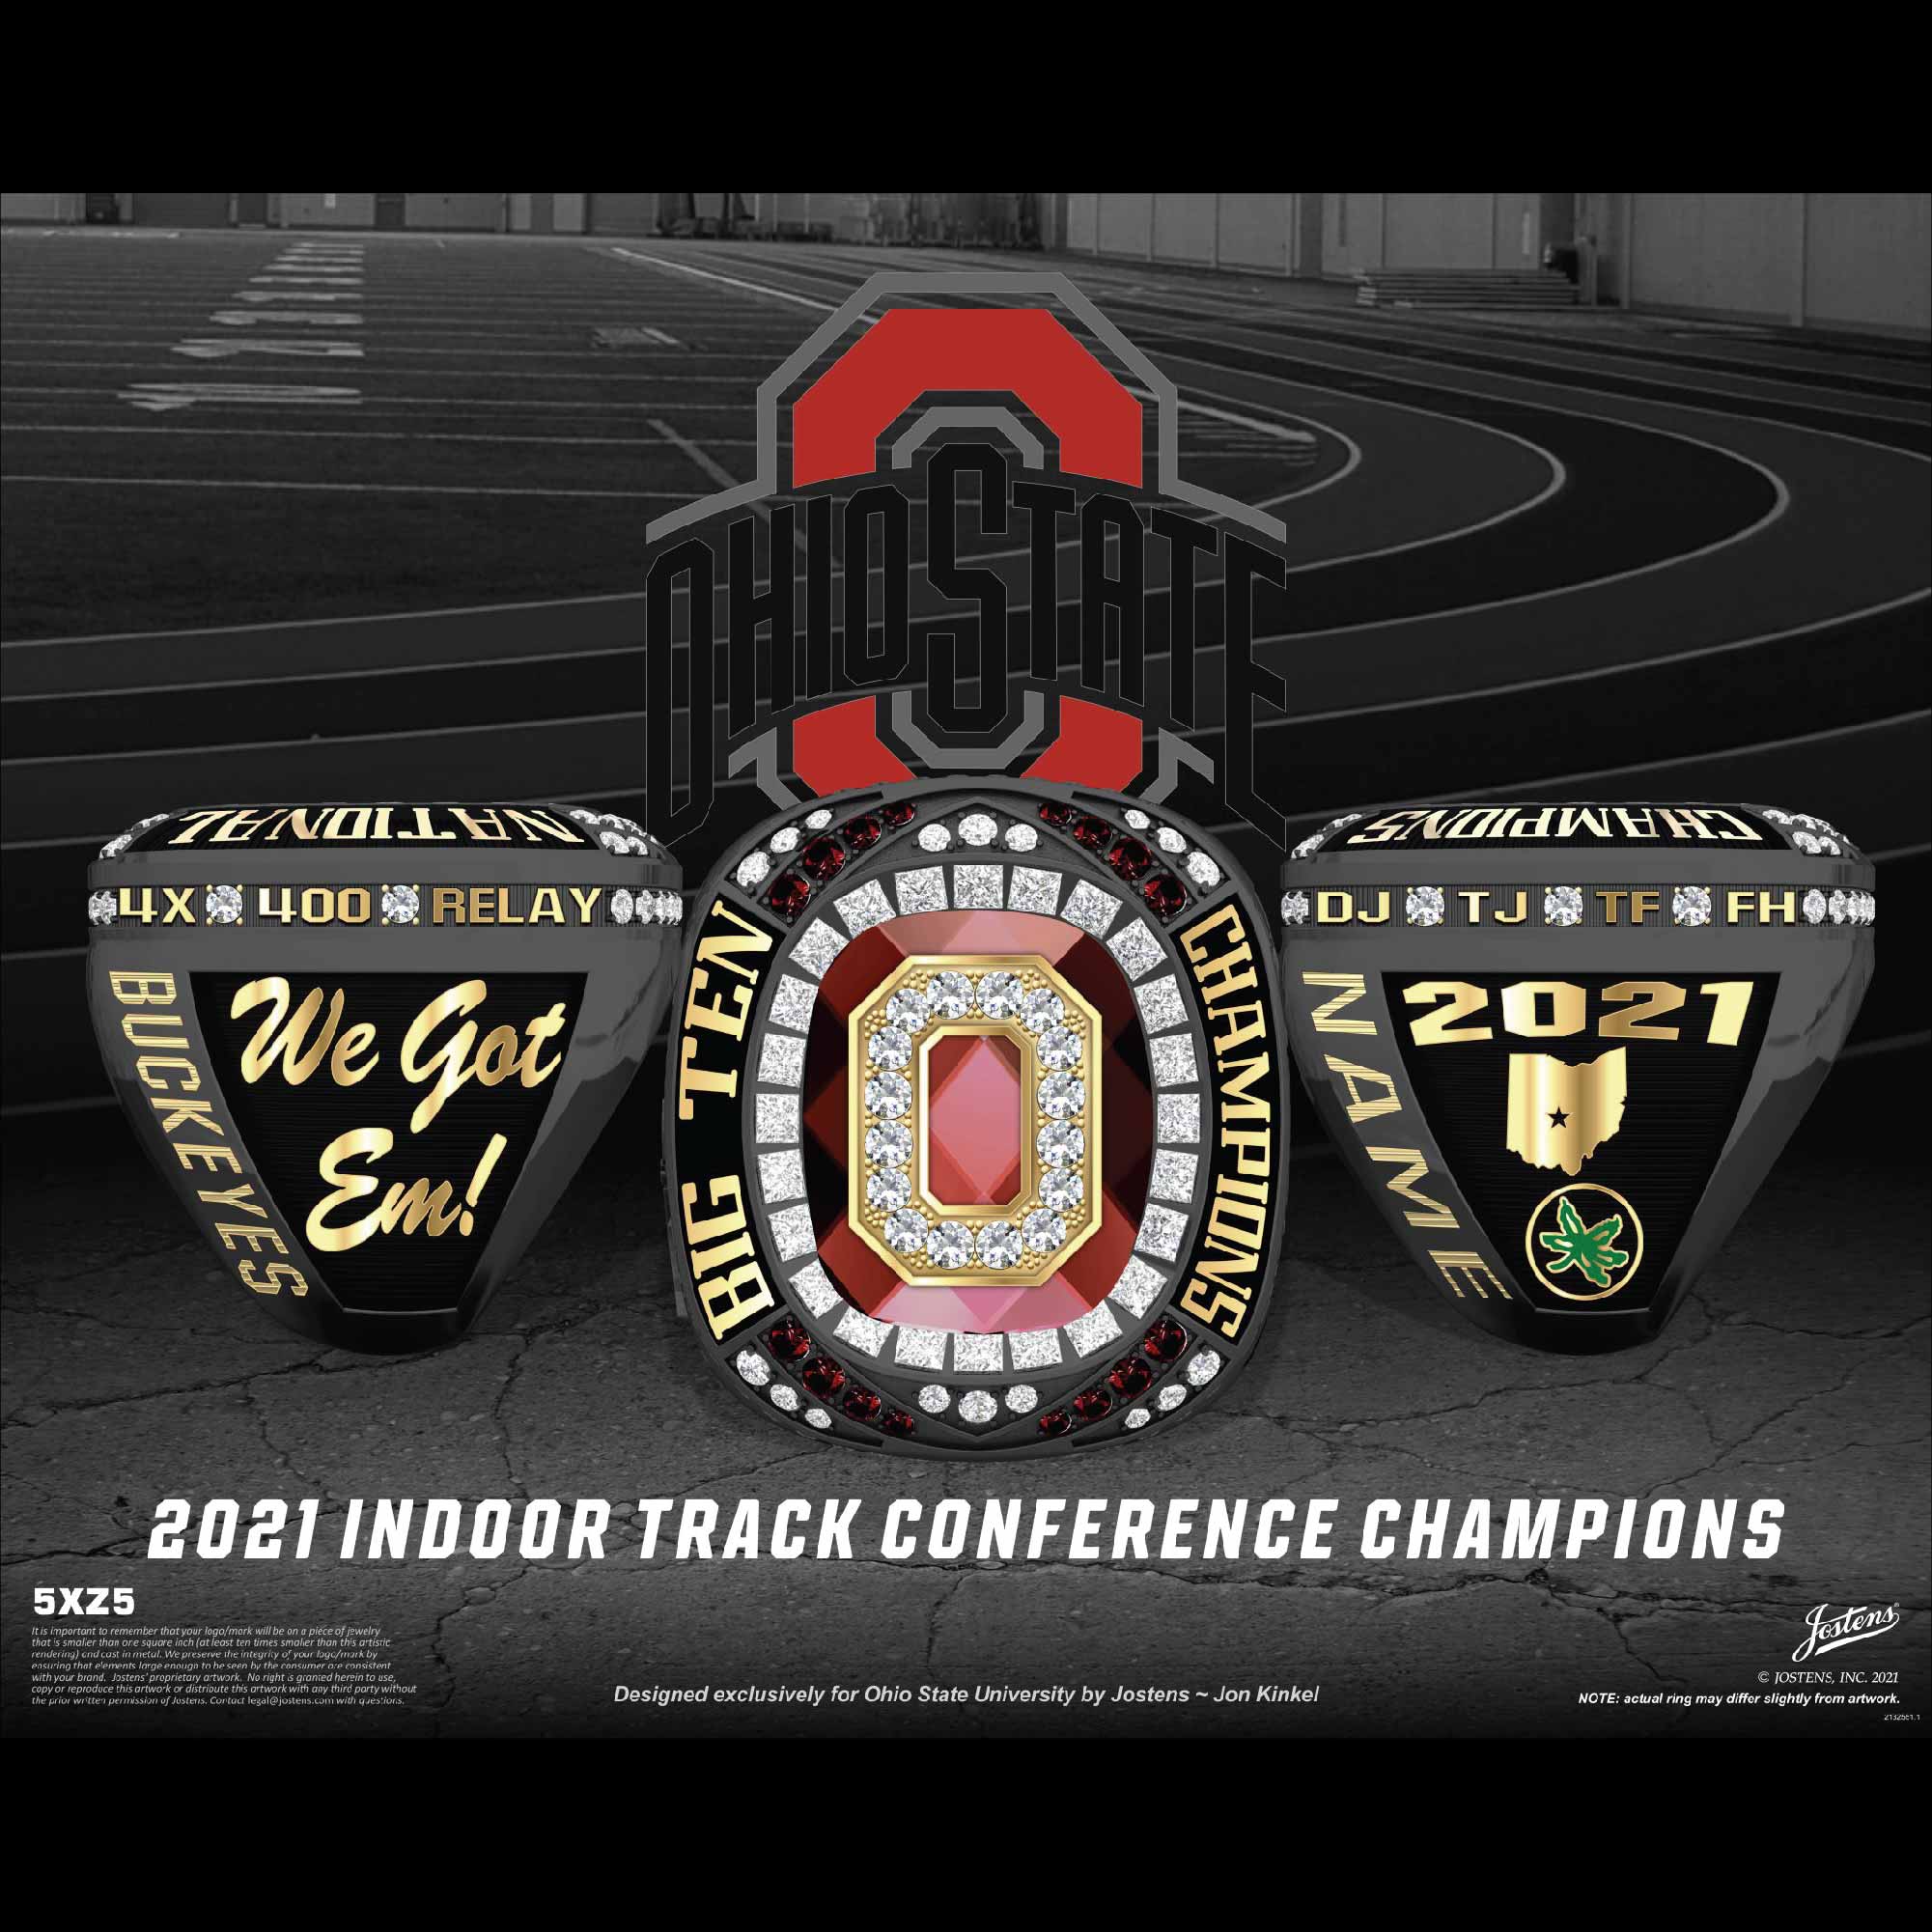 Ohio State University Men's Track & Field 2021 Conference Championship Ring